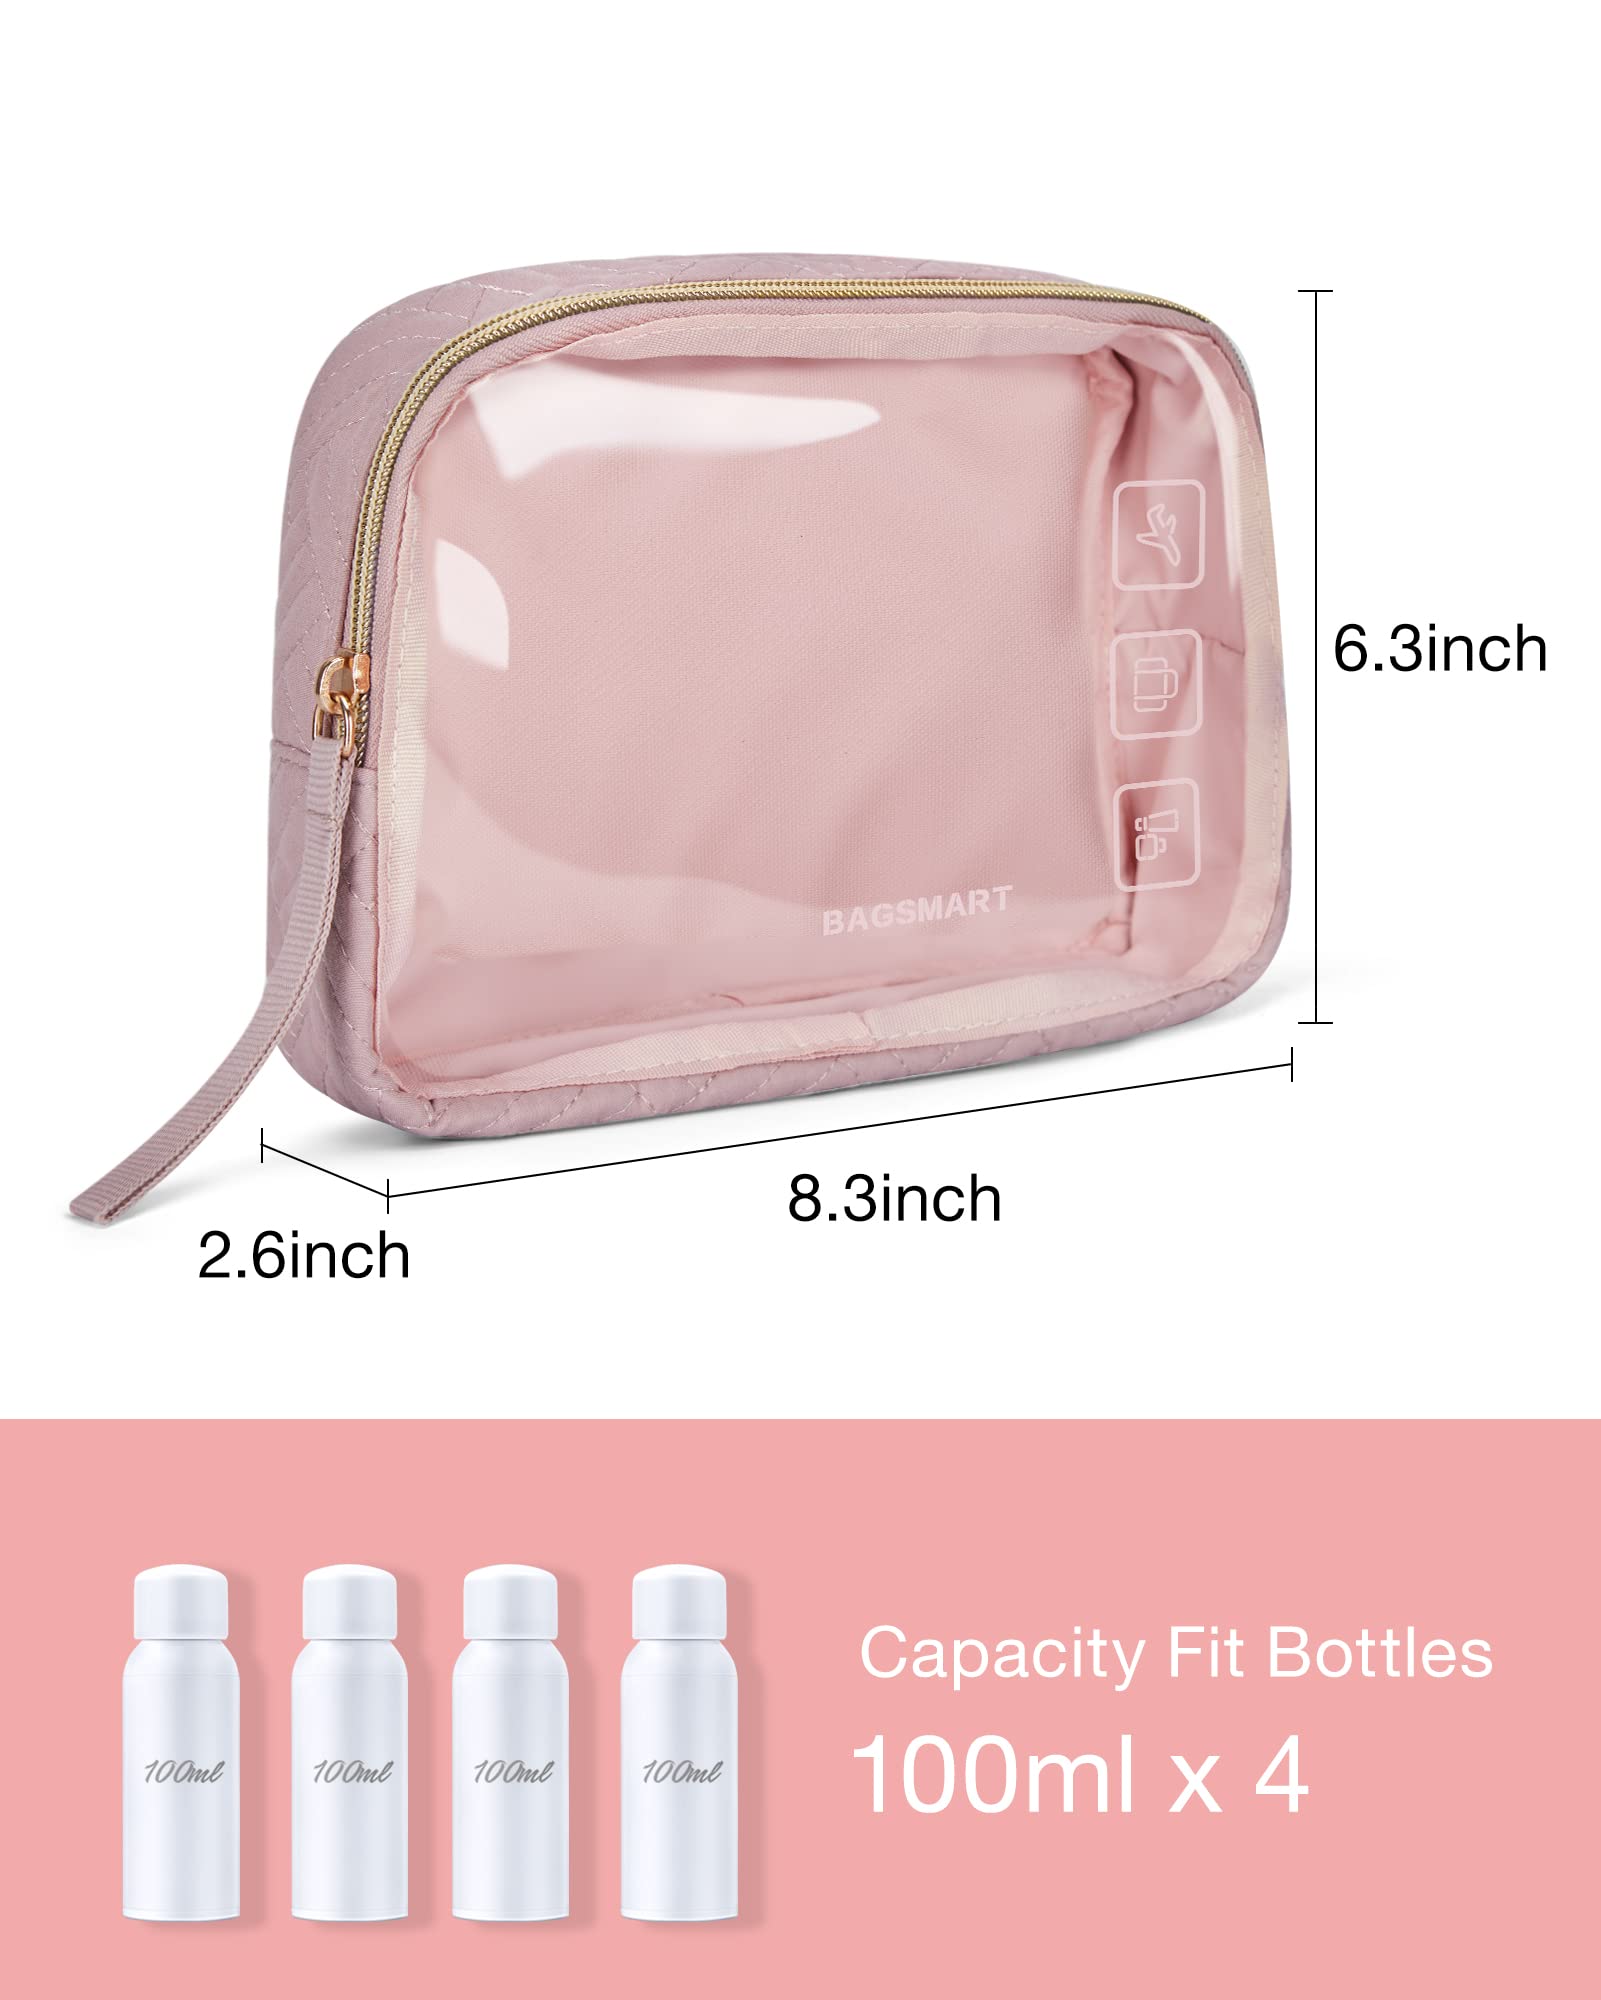 BAGSMART TSA Approved Toiletry Bag, 2 Pack Clear Makeup Cosmetic Bag Organizer, Quart Size Travel Bag for Toiletries, Carry-on Travel Accessories Essentials - Pink